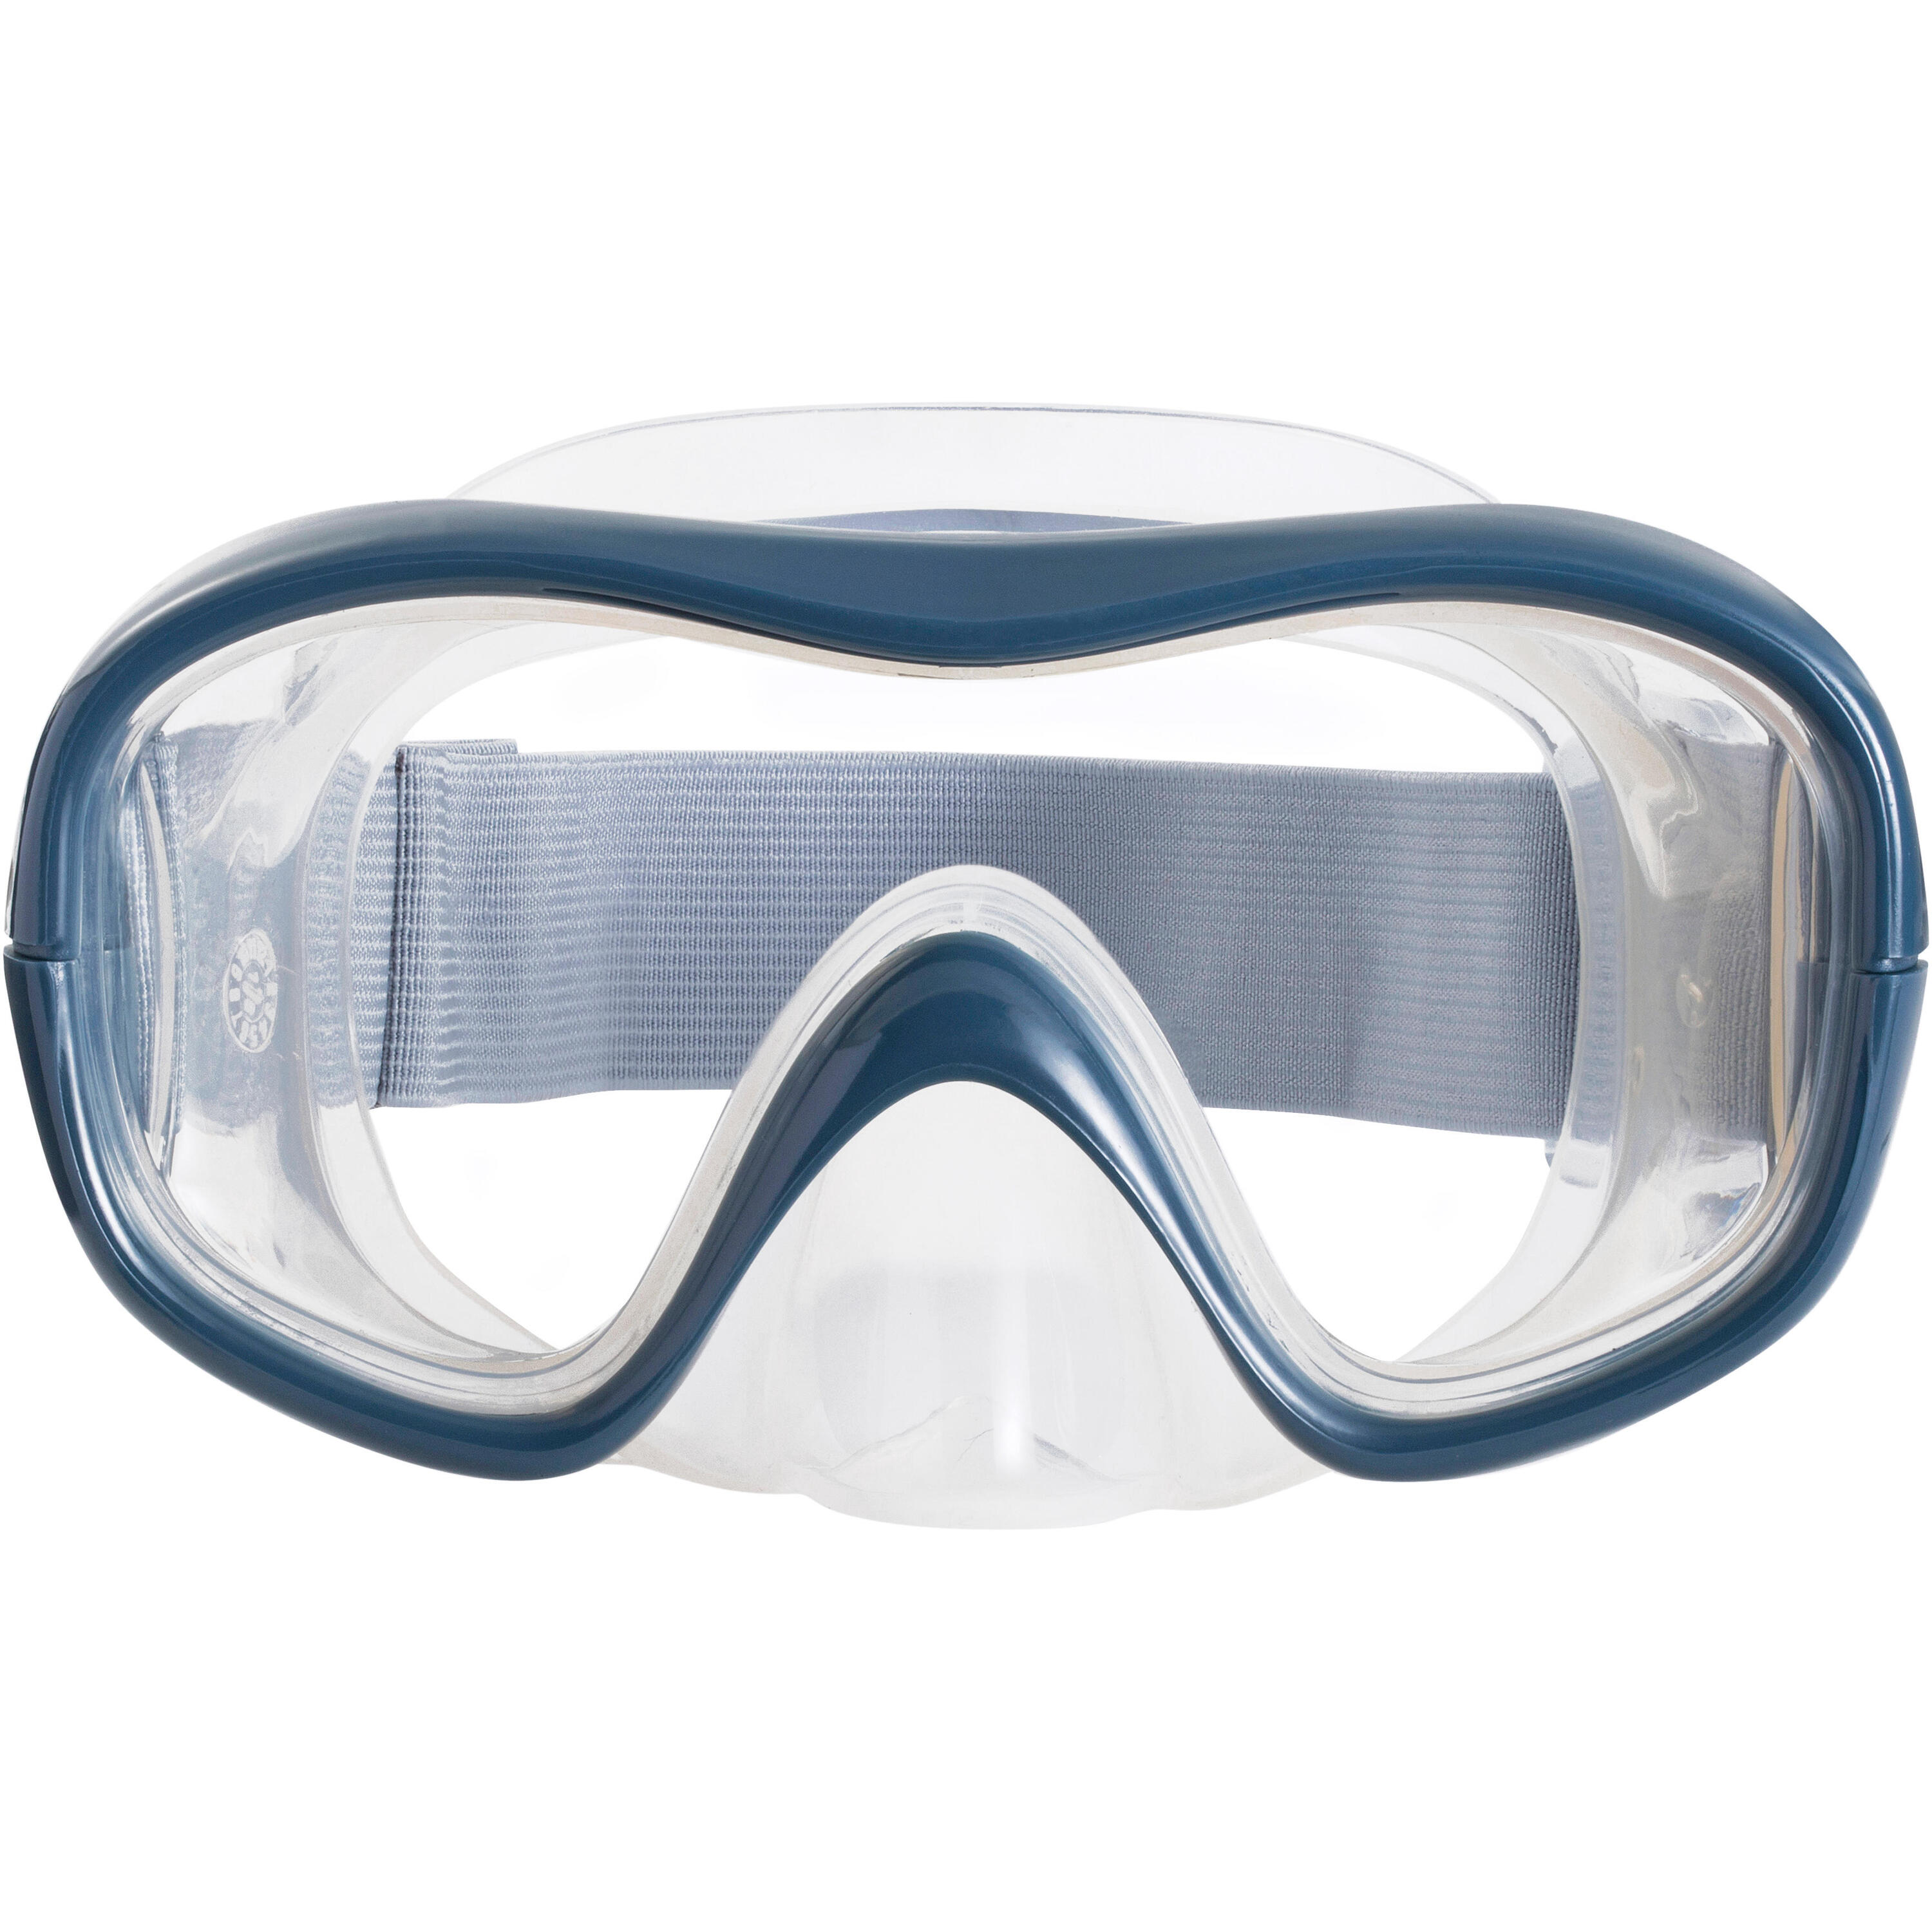 Adult and kids' diving snorkelling Mask and Snorkel kit SNK 500 - grey 4/18